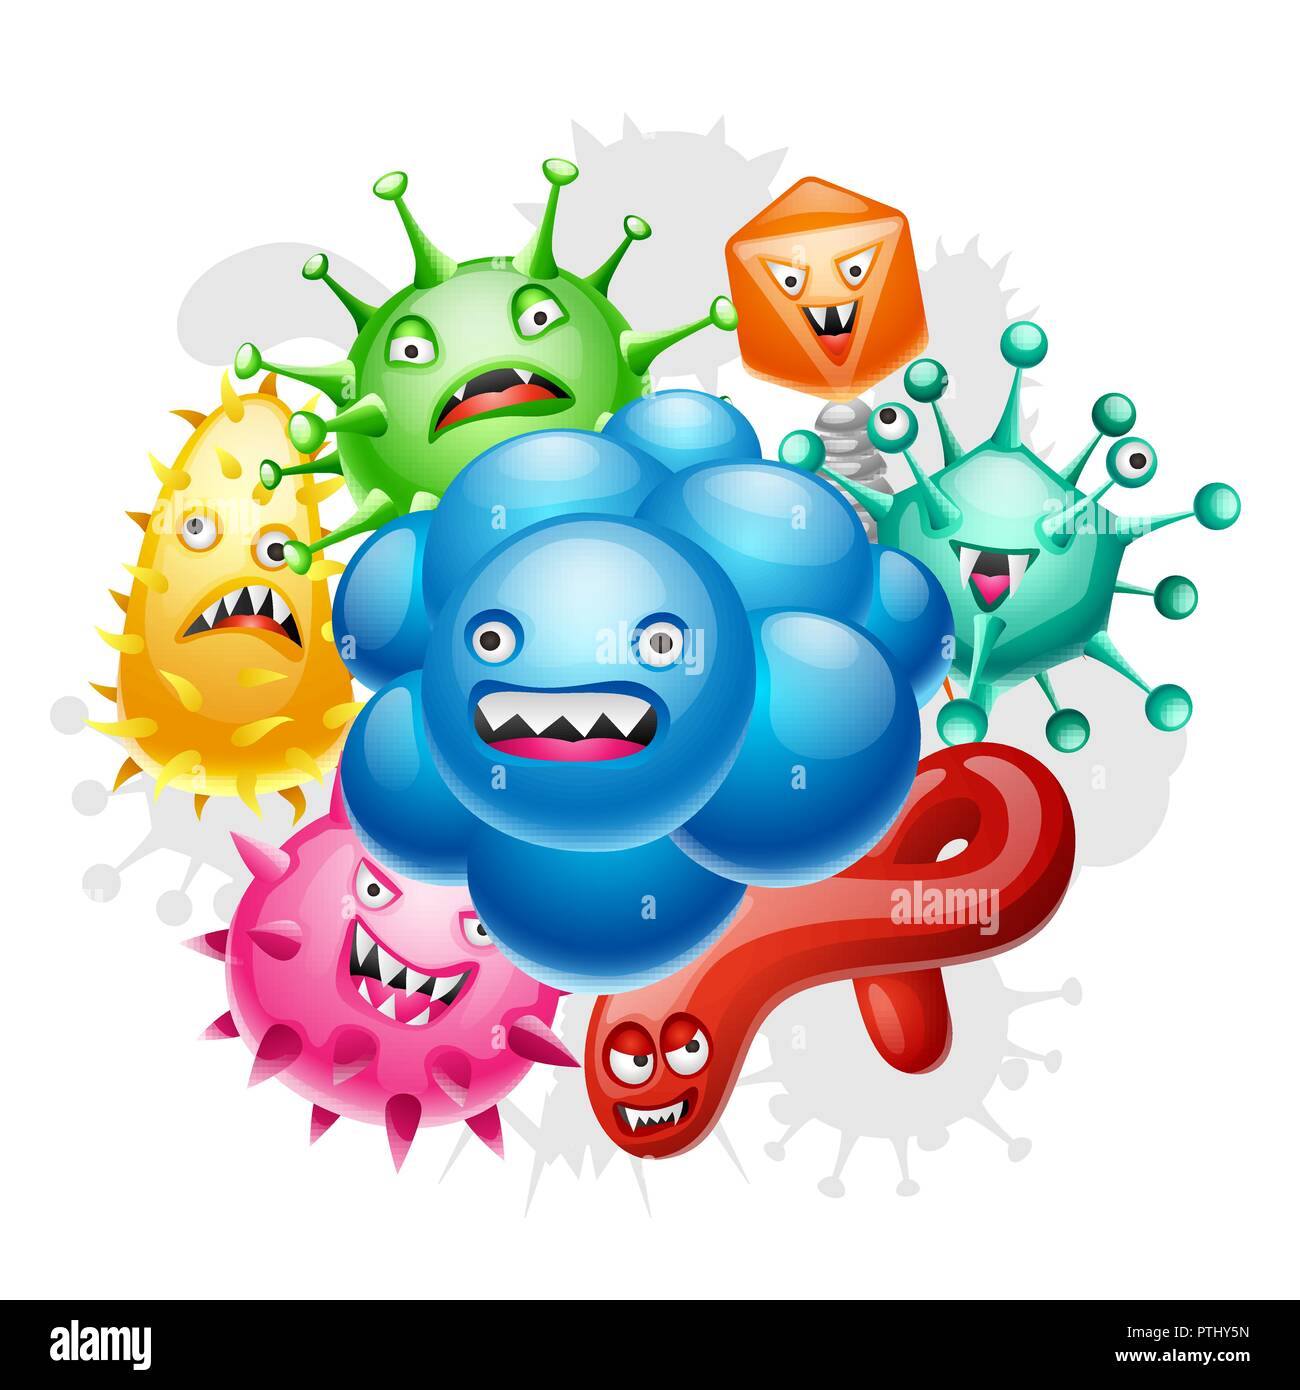 Background with little angry viruses. Stock Vector